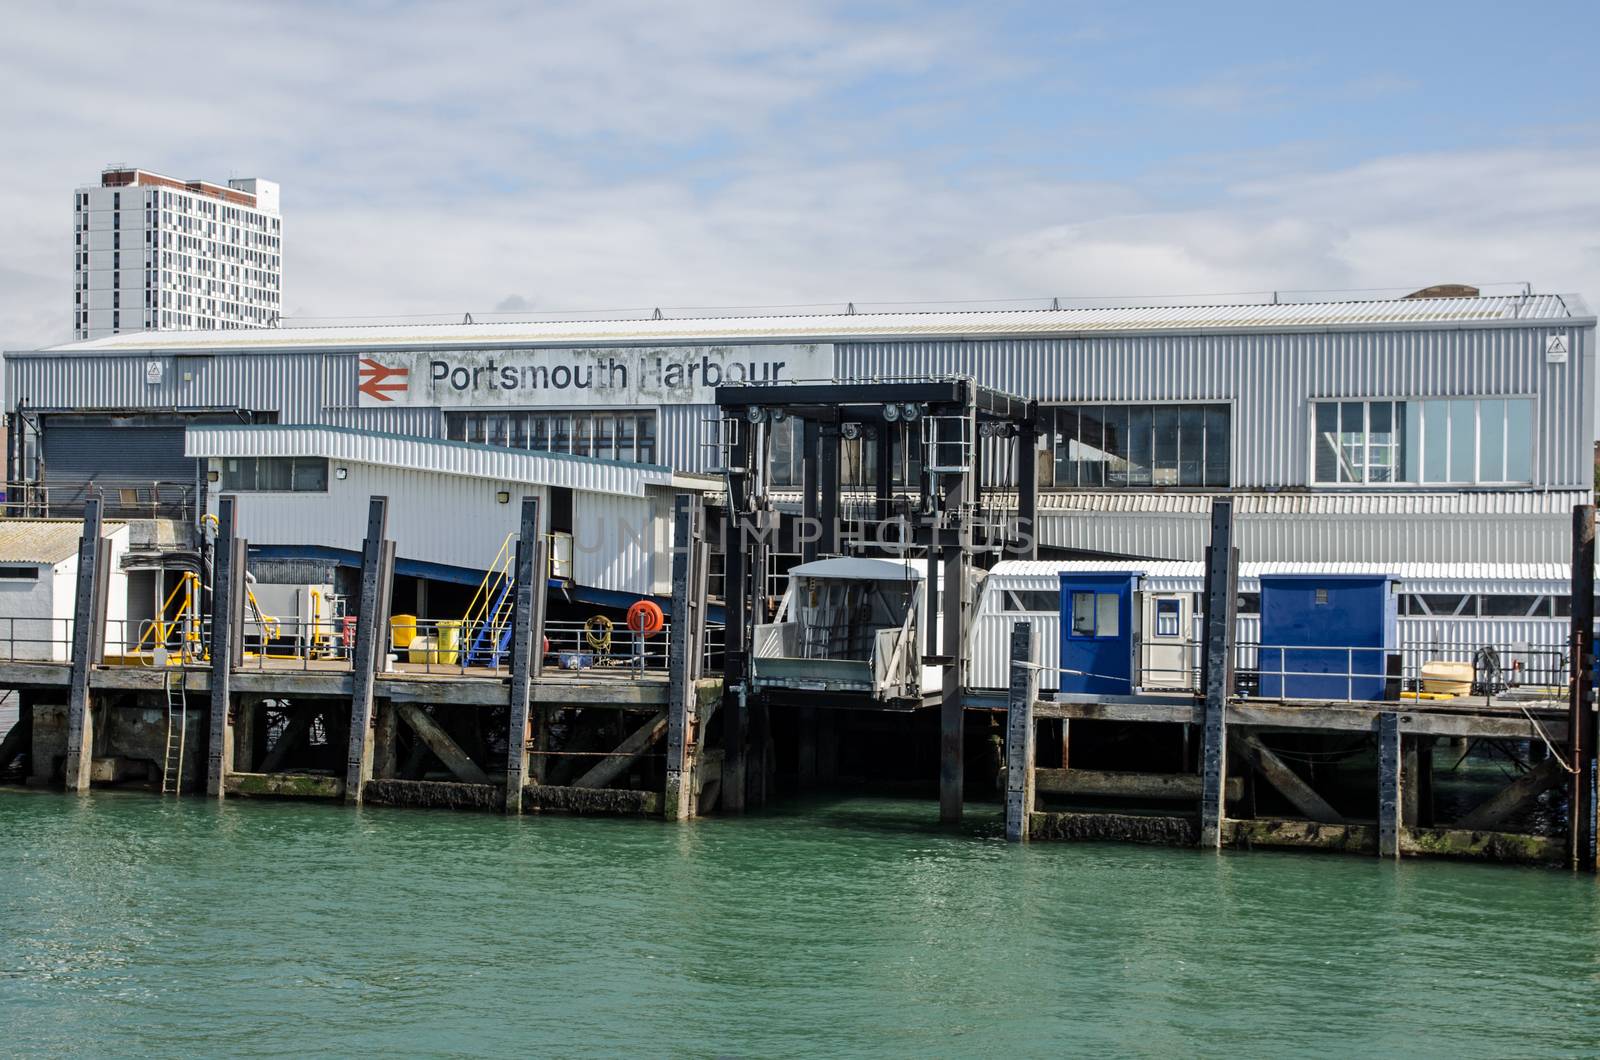 Portsmouth Harbour Railway Station from the sea by BasPhoto